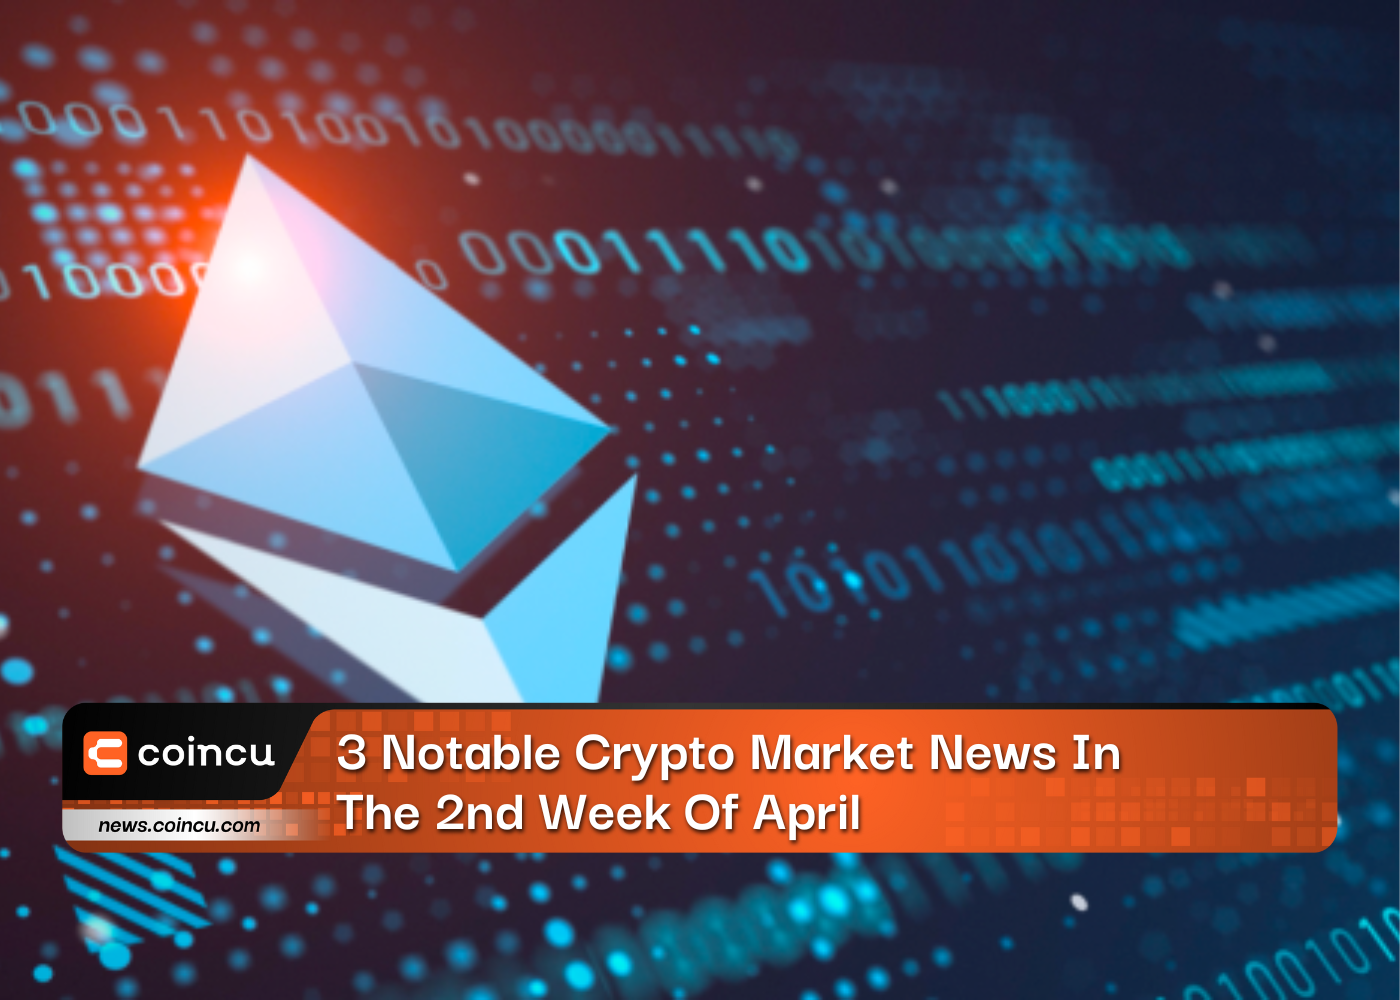 3 Notable Crypto Market News In The 2nd Week Of April